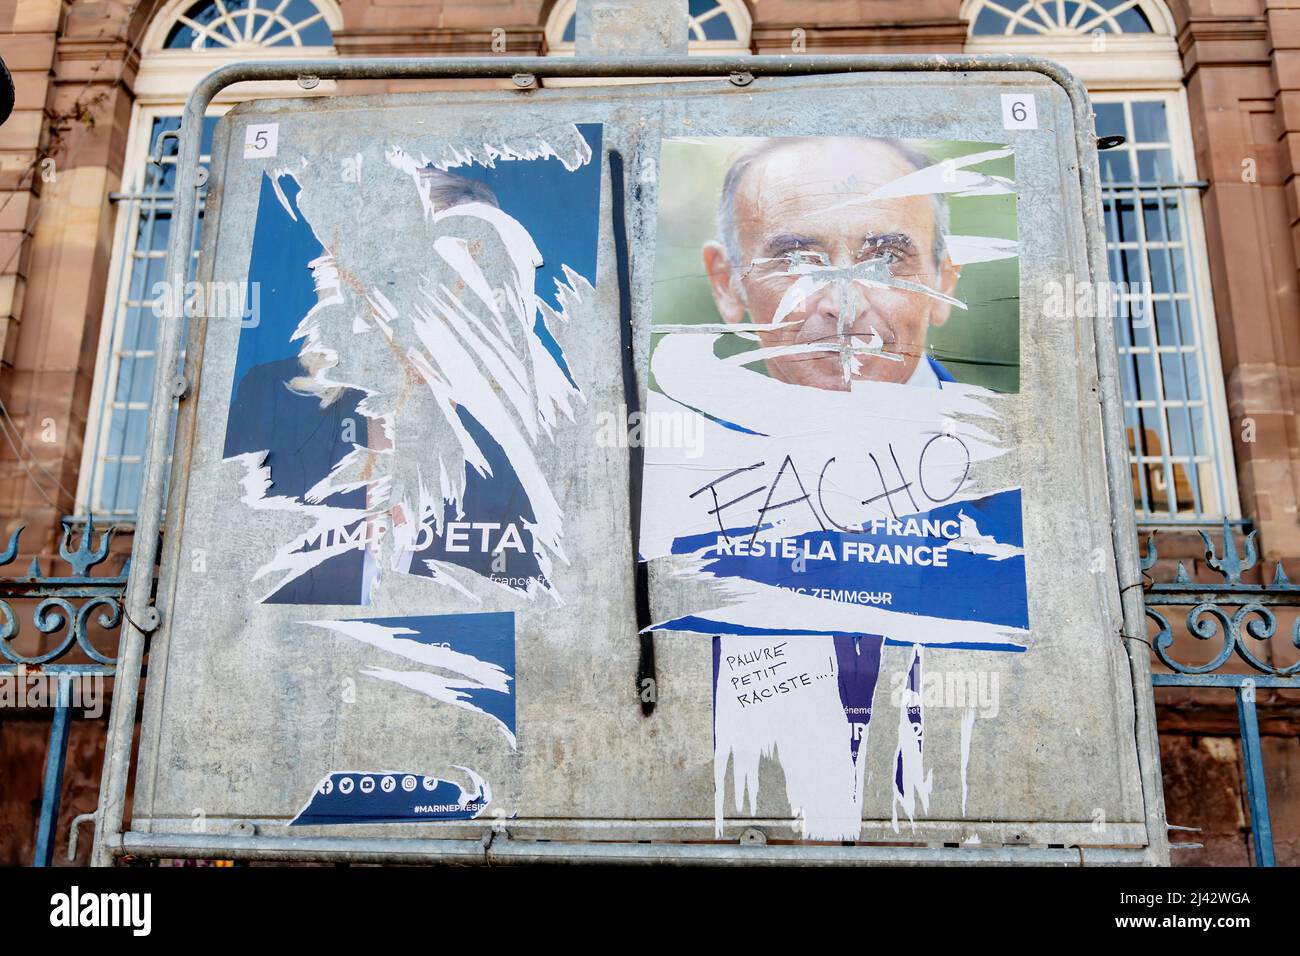 STRASBOURG, FRANCE - APR 23, 2022: French presidential posters for the upcoming presidential election in France, in front of the City Hall building in Strasbourg featuring Eric Zemour and Marine Le Pen Stock Photo